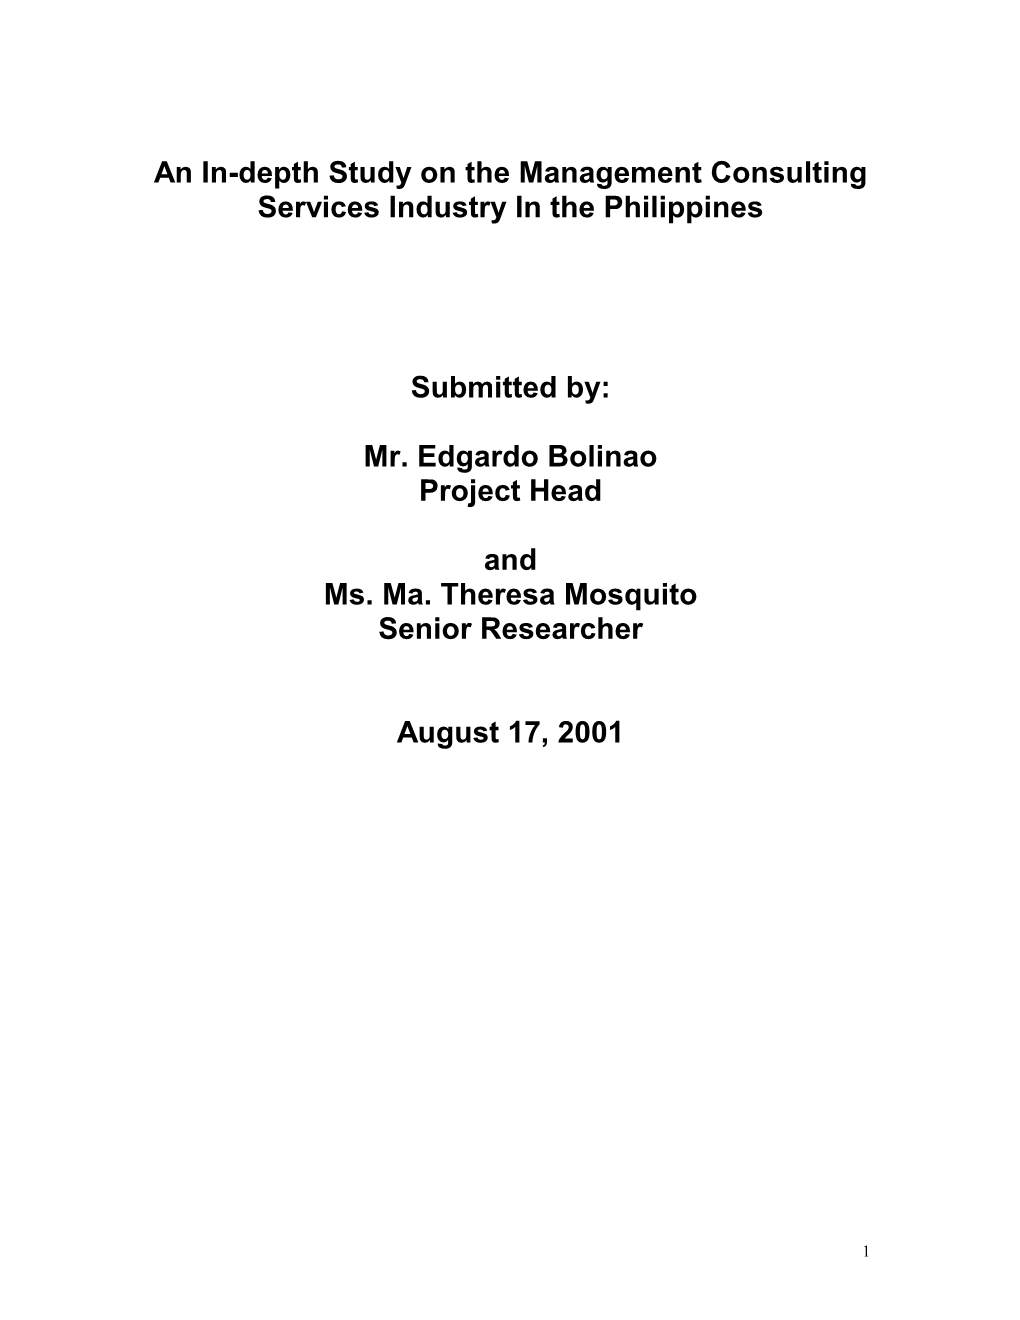 An In-Depth Study on the Management Consulting Services Industry in the Philippines